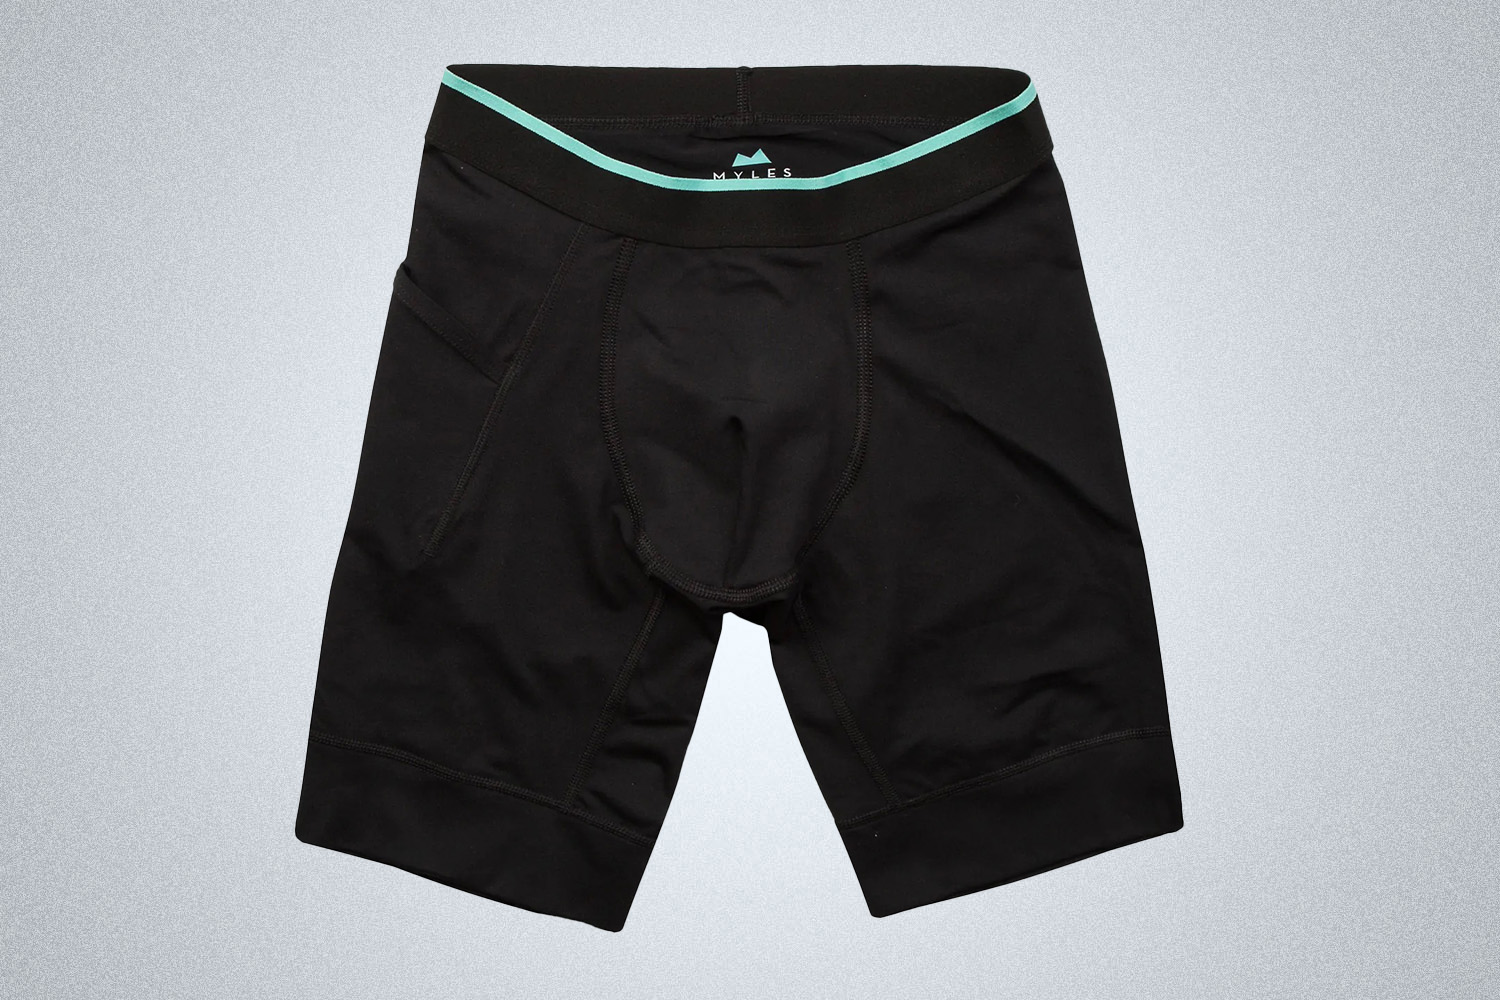 a pair of black compression shorts from the Myles Apparel Sale on a grey background